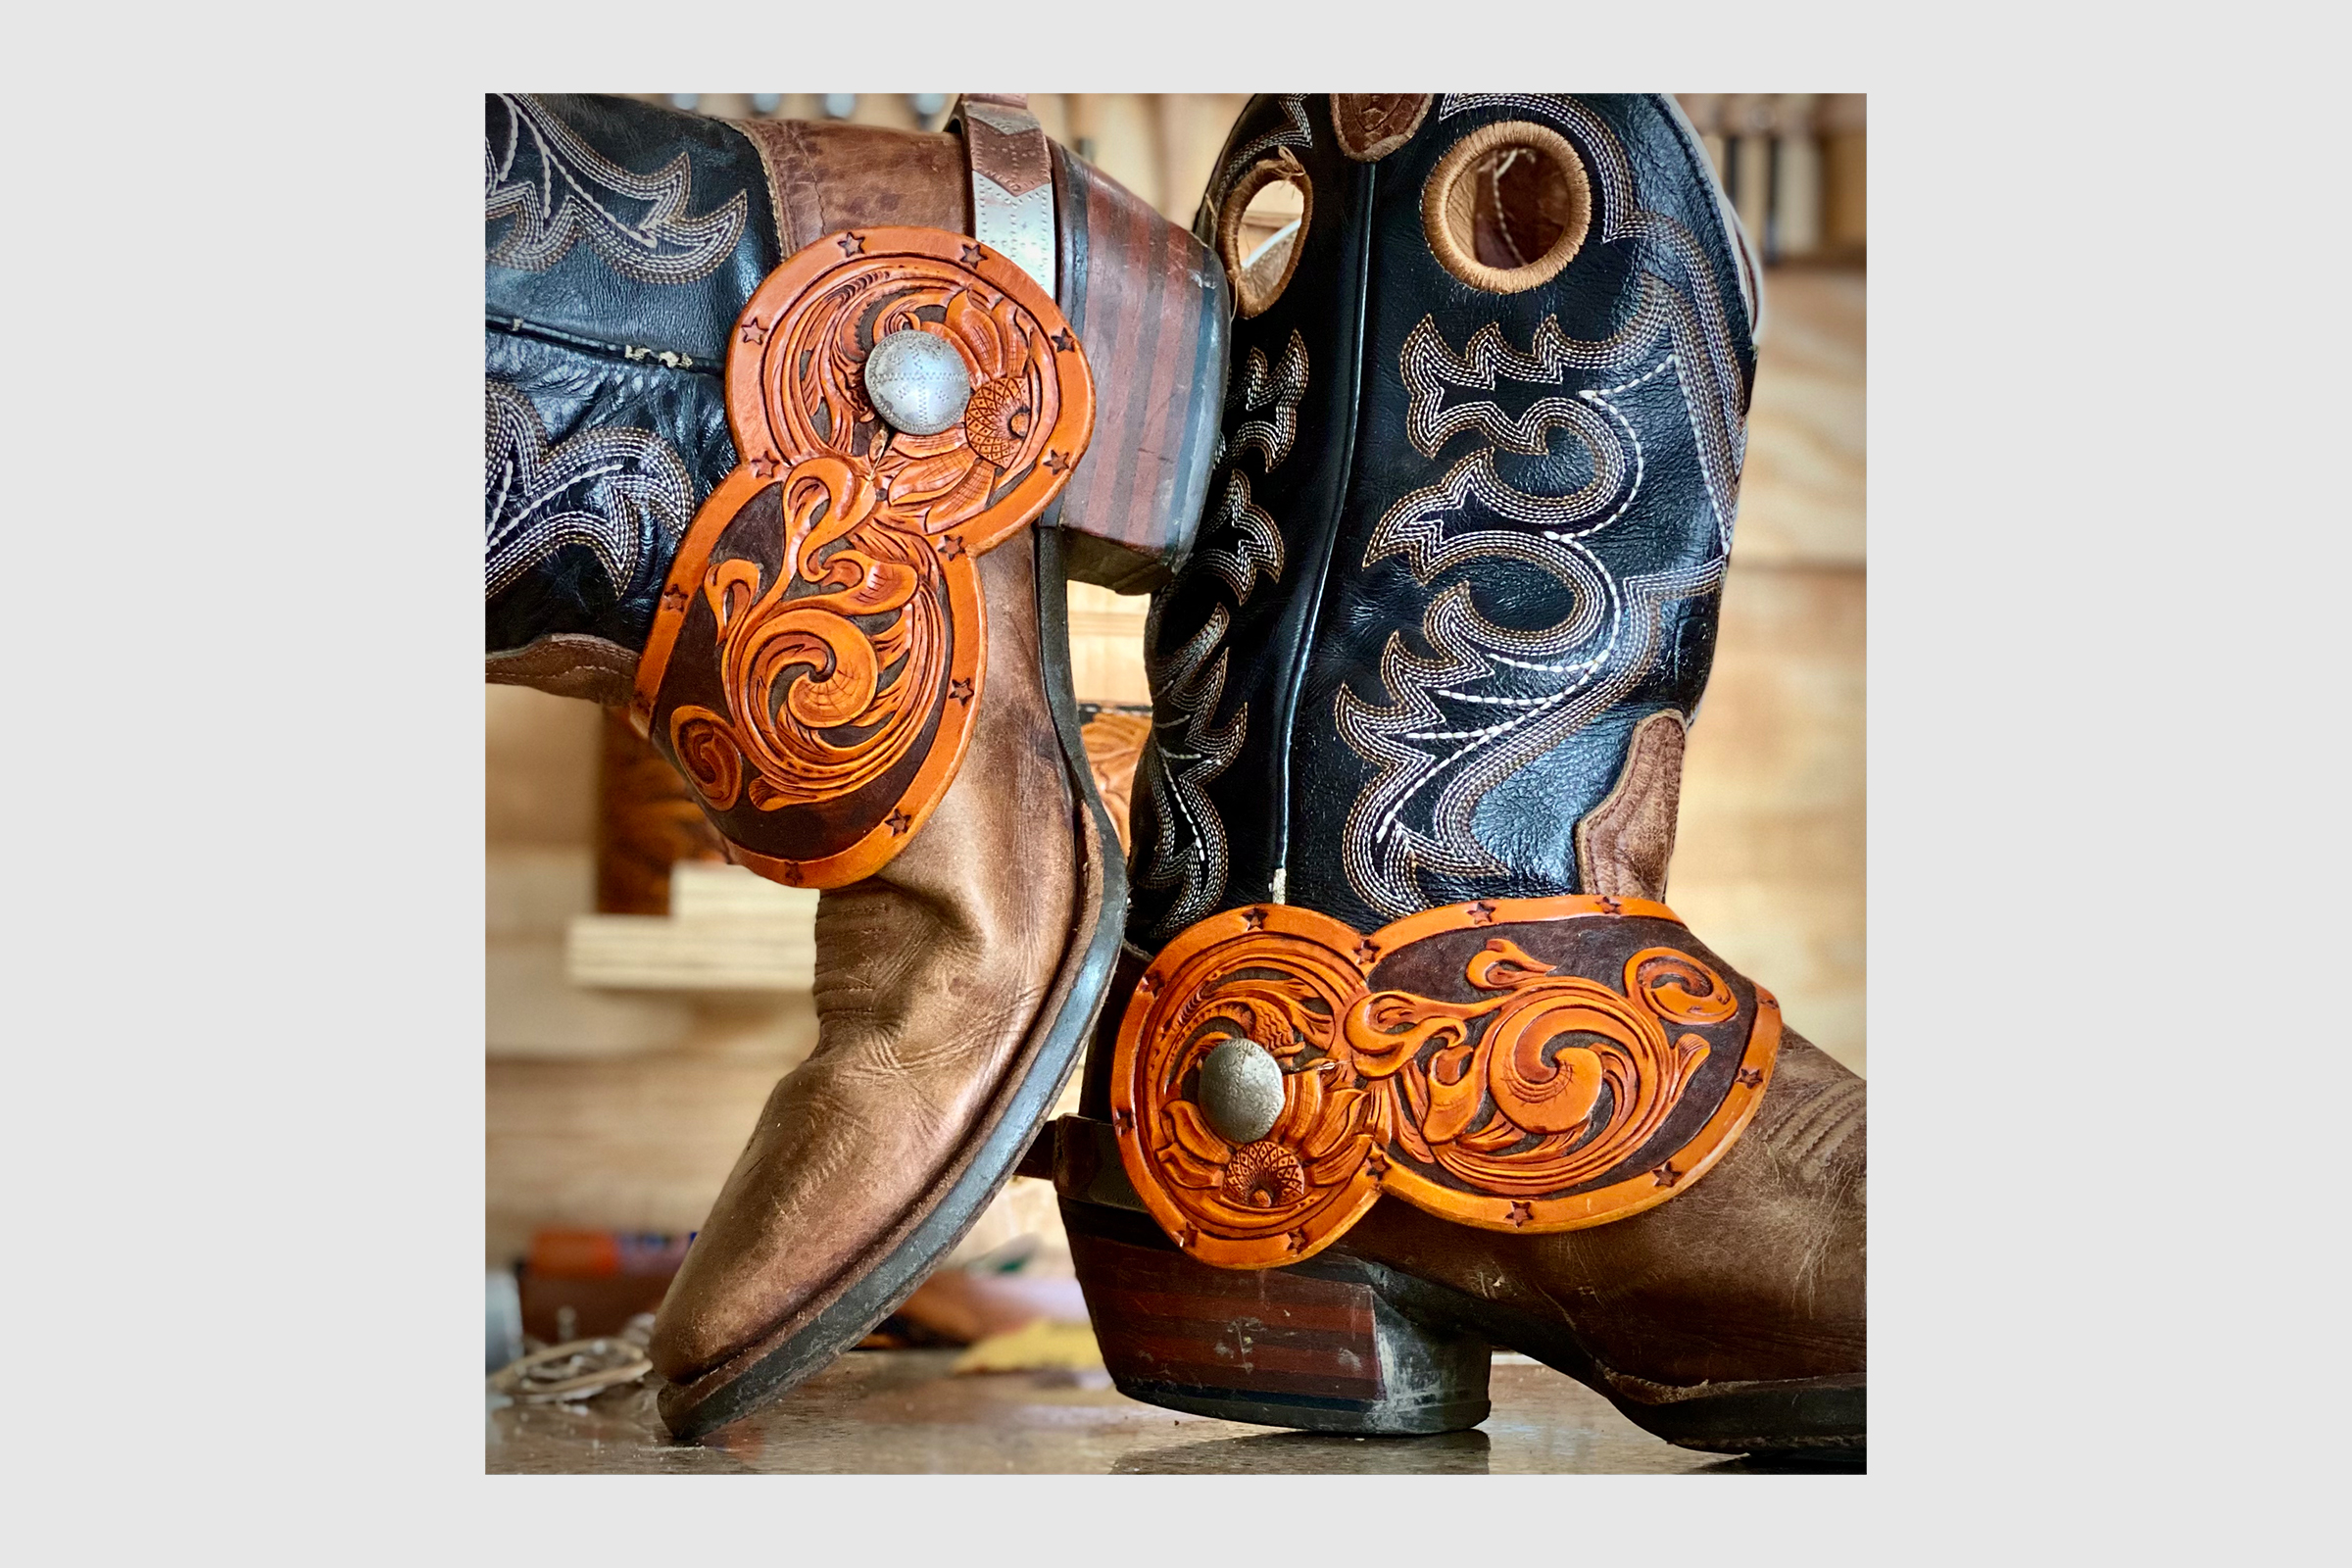 Leather boots crafted by Clackdaddy Leather.